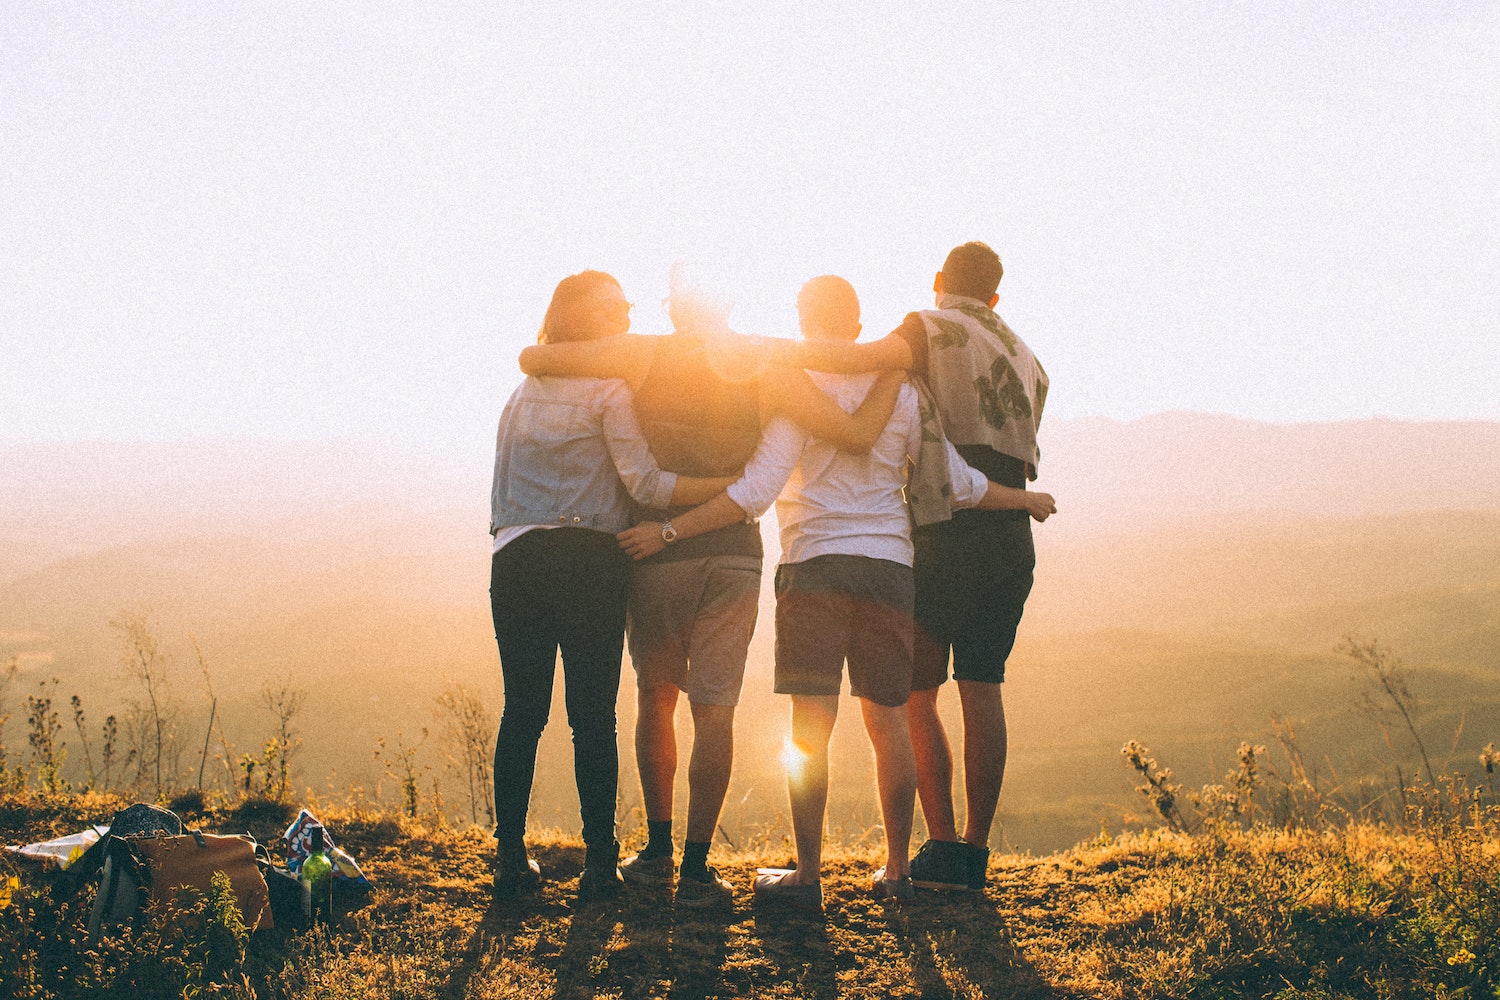 Group of people hugging in front of a sunset